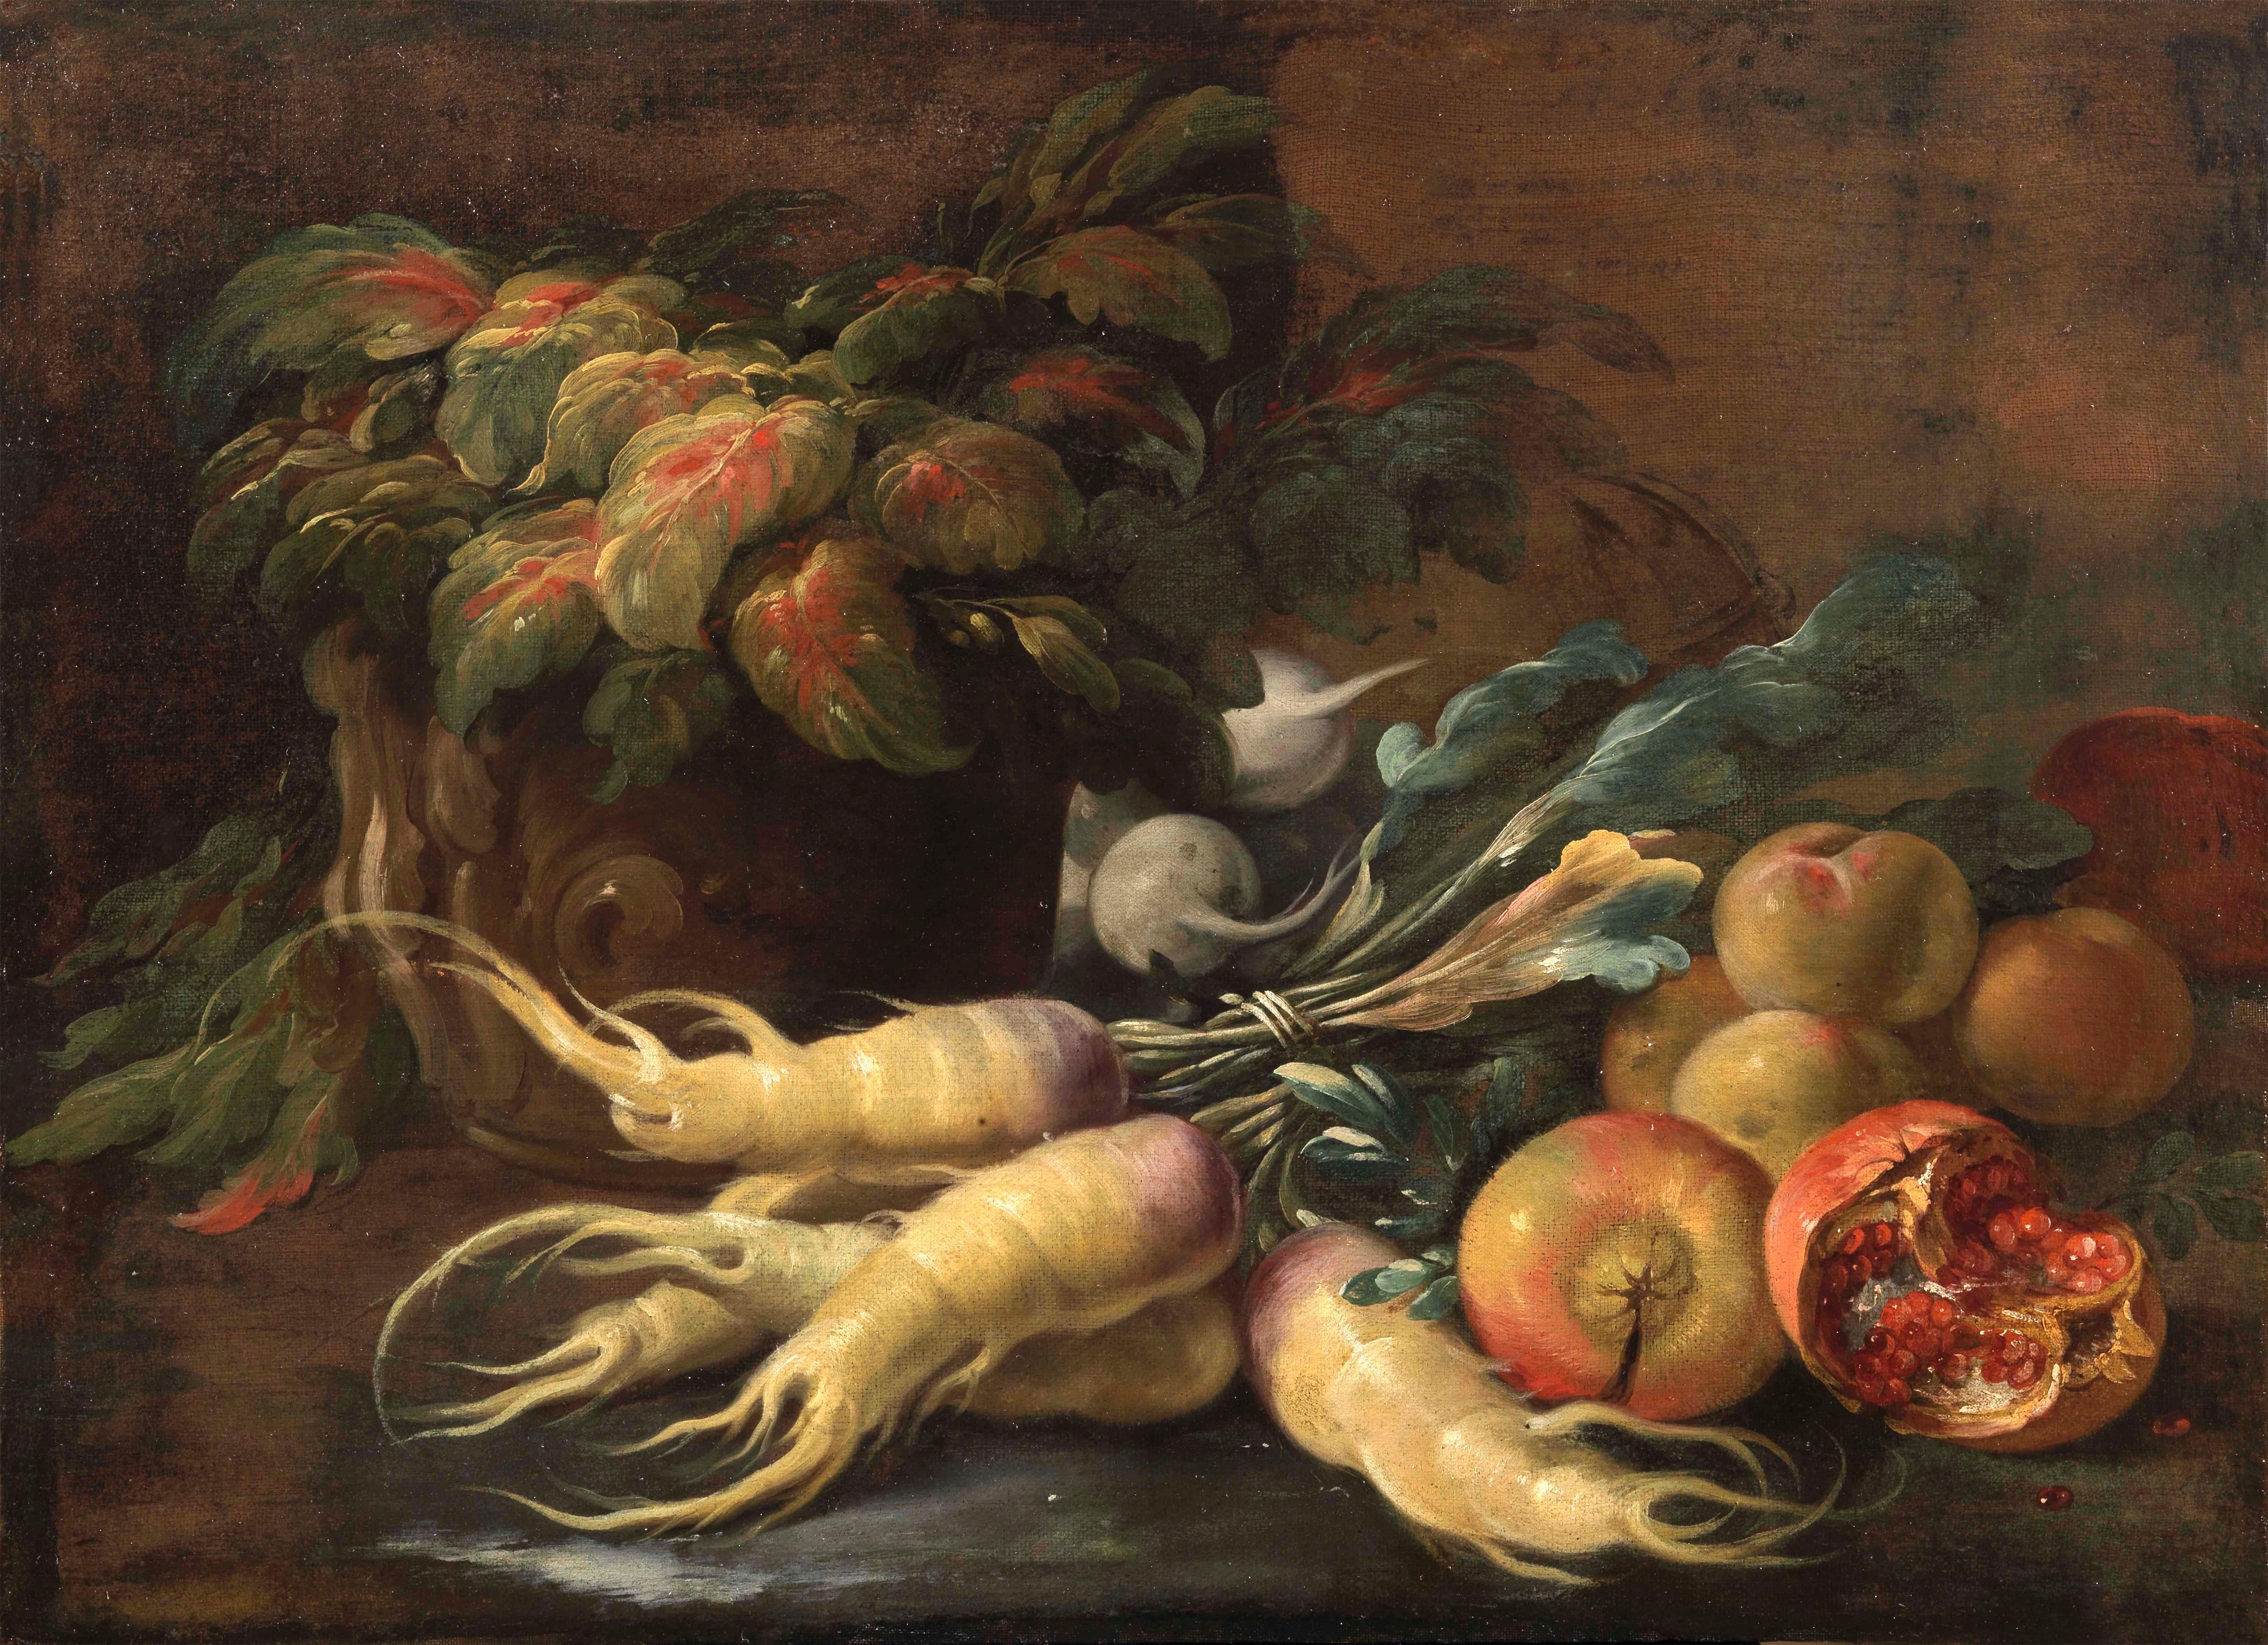 Two Exceptional Italian 18th Century Still-Life Paintings by Lopez & Houbraken 4